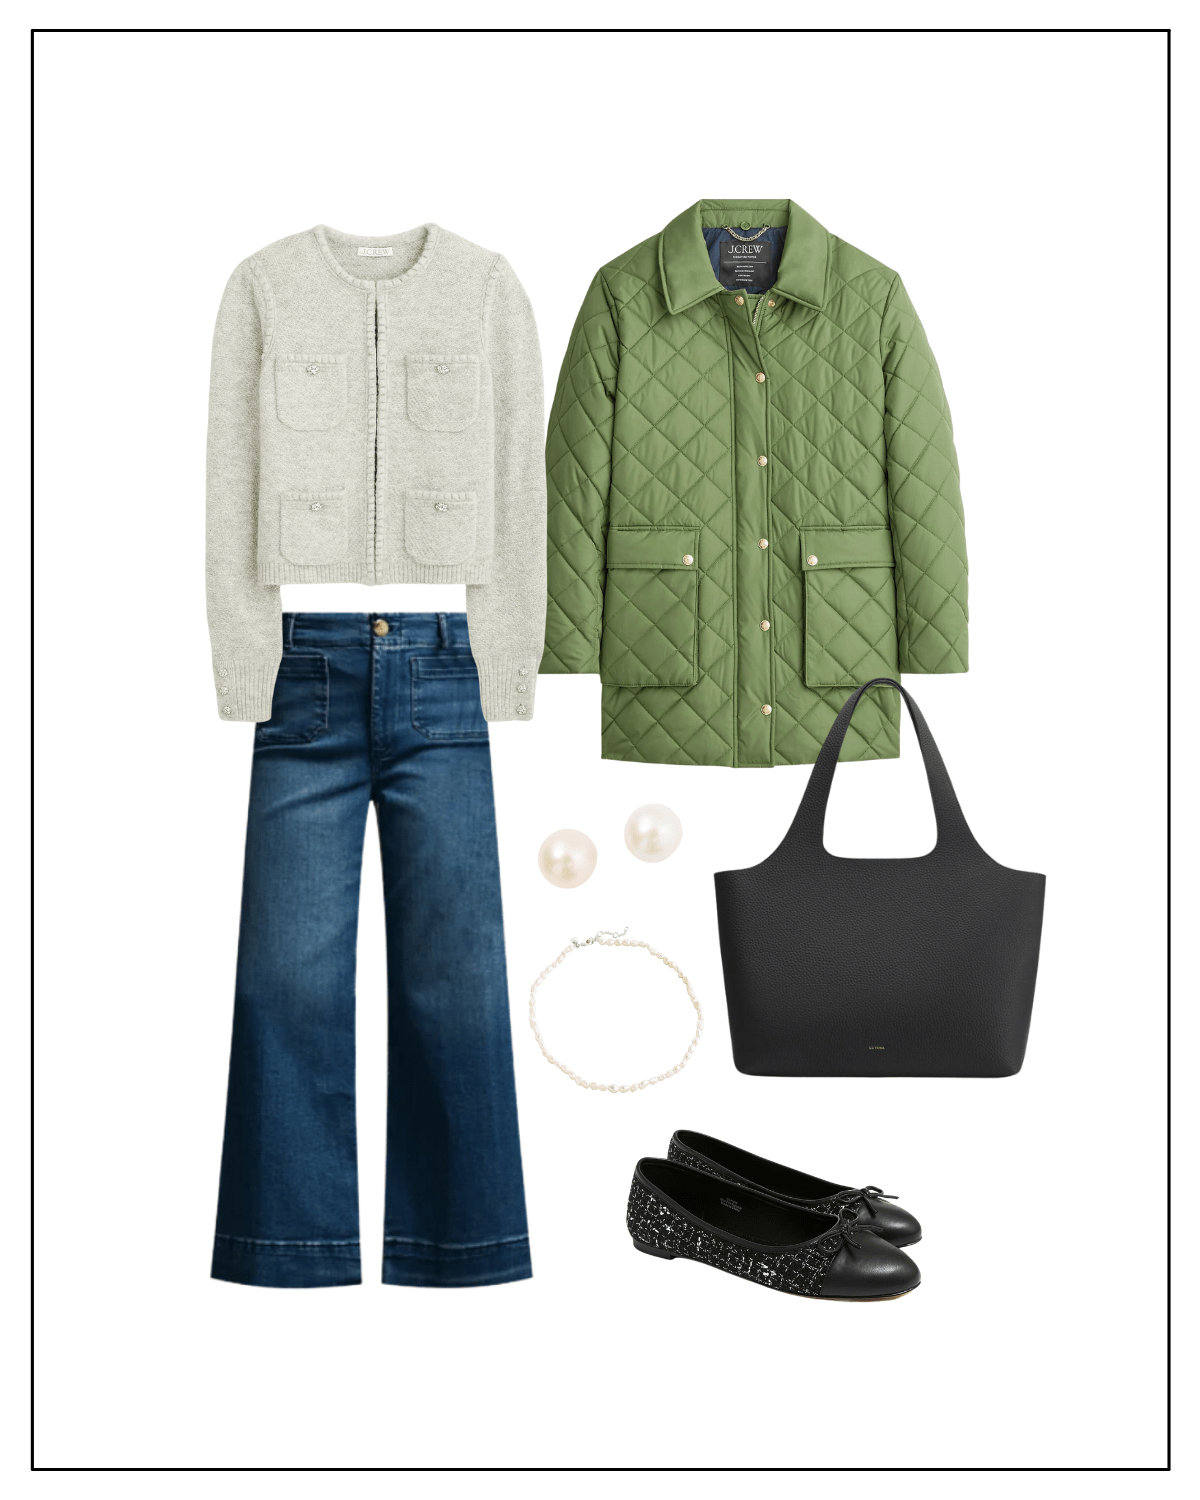 J.Crew Fall Outfit Ideas